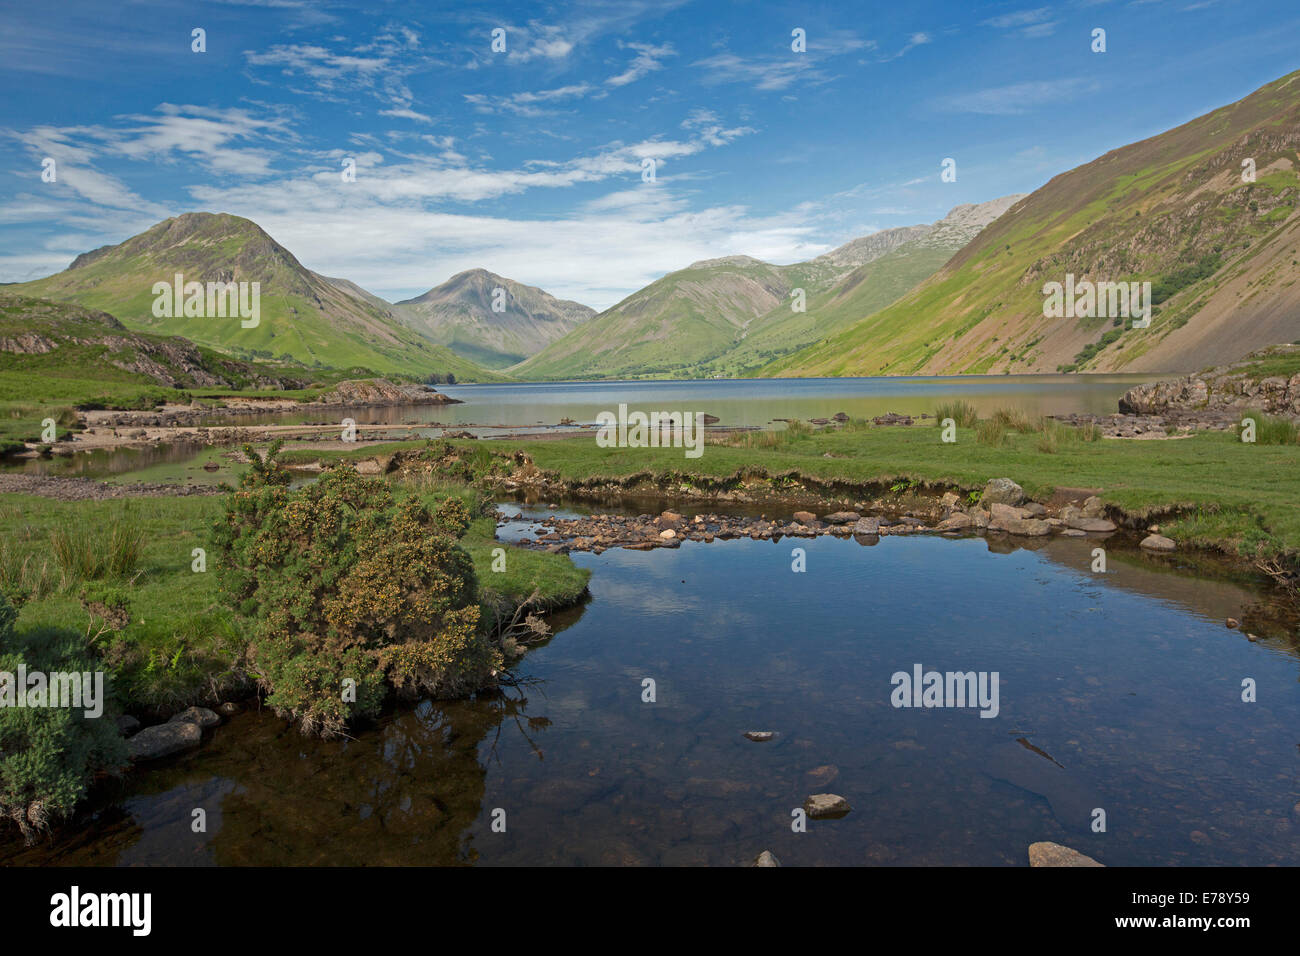 Wastwater, in Lake District of Cumbria, England,surrounded by mountain peaks with blue sky reflected in calm water of lake Stock Photo